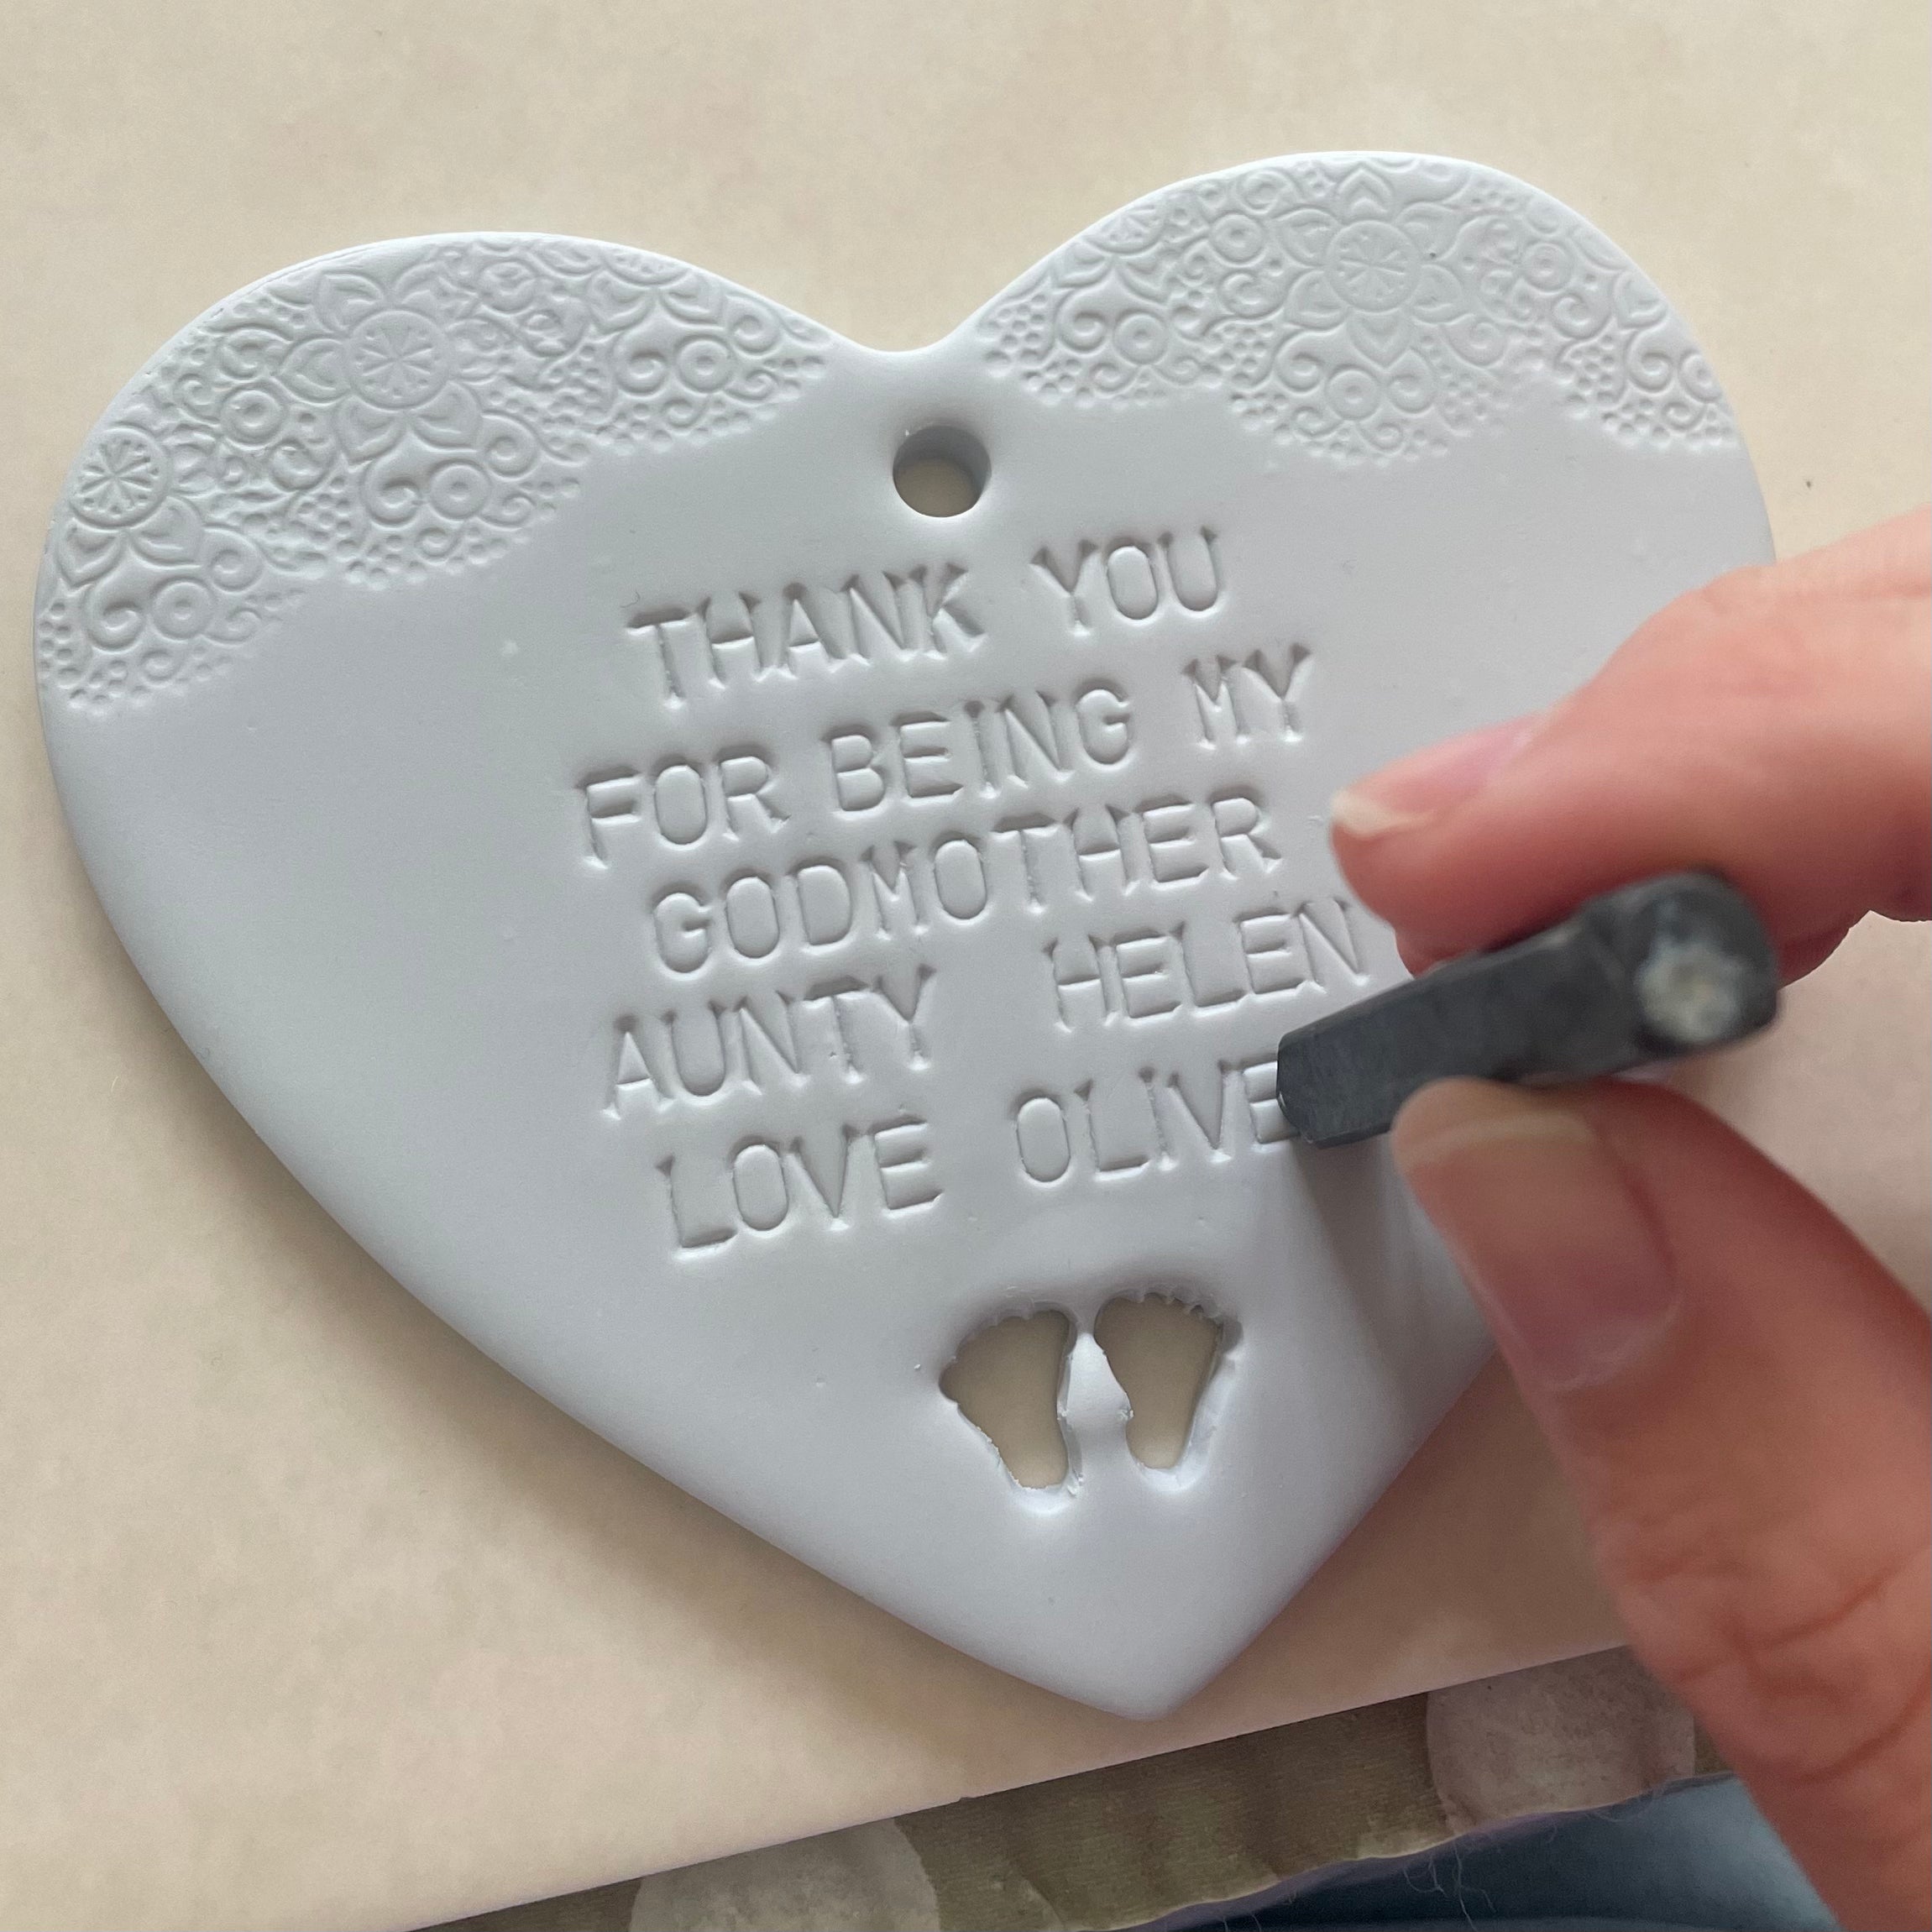 Kirsty hand stamping the personalisation onto the grey Godmother heart